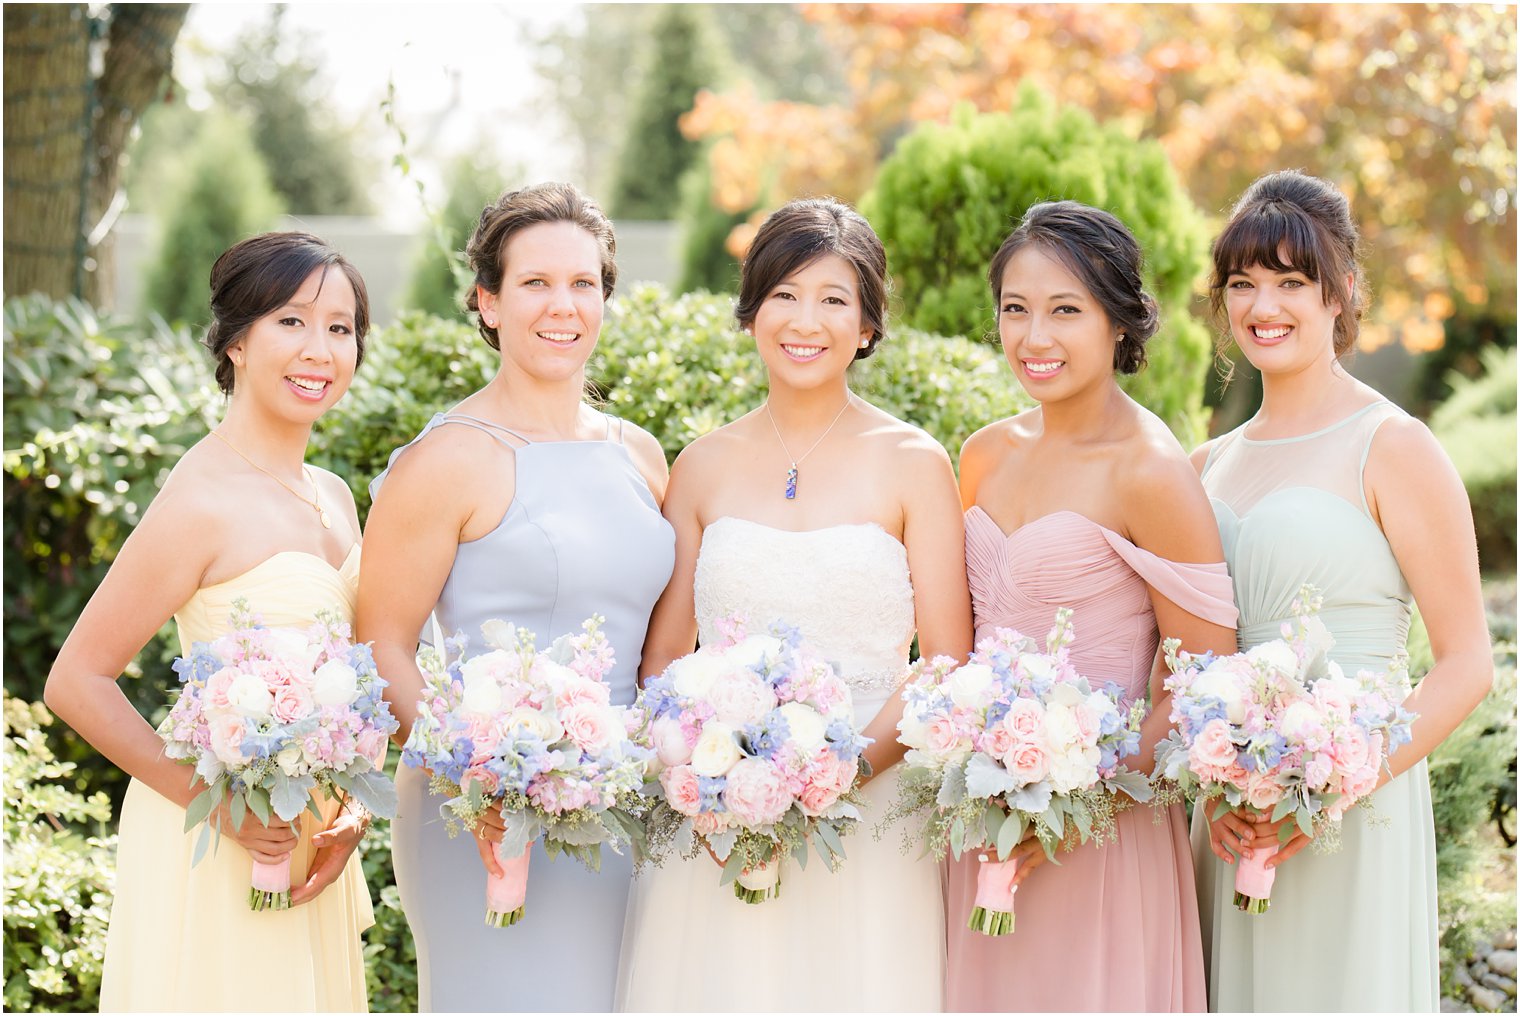 bride with bridesmaids in pastel gowns from David's Bridal with bouquets from Secret Garden